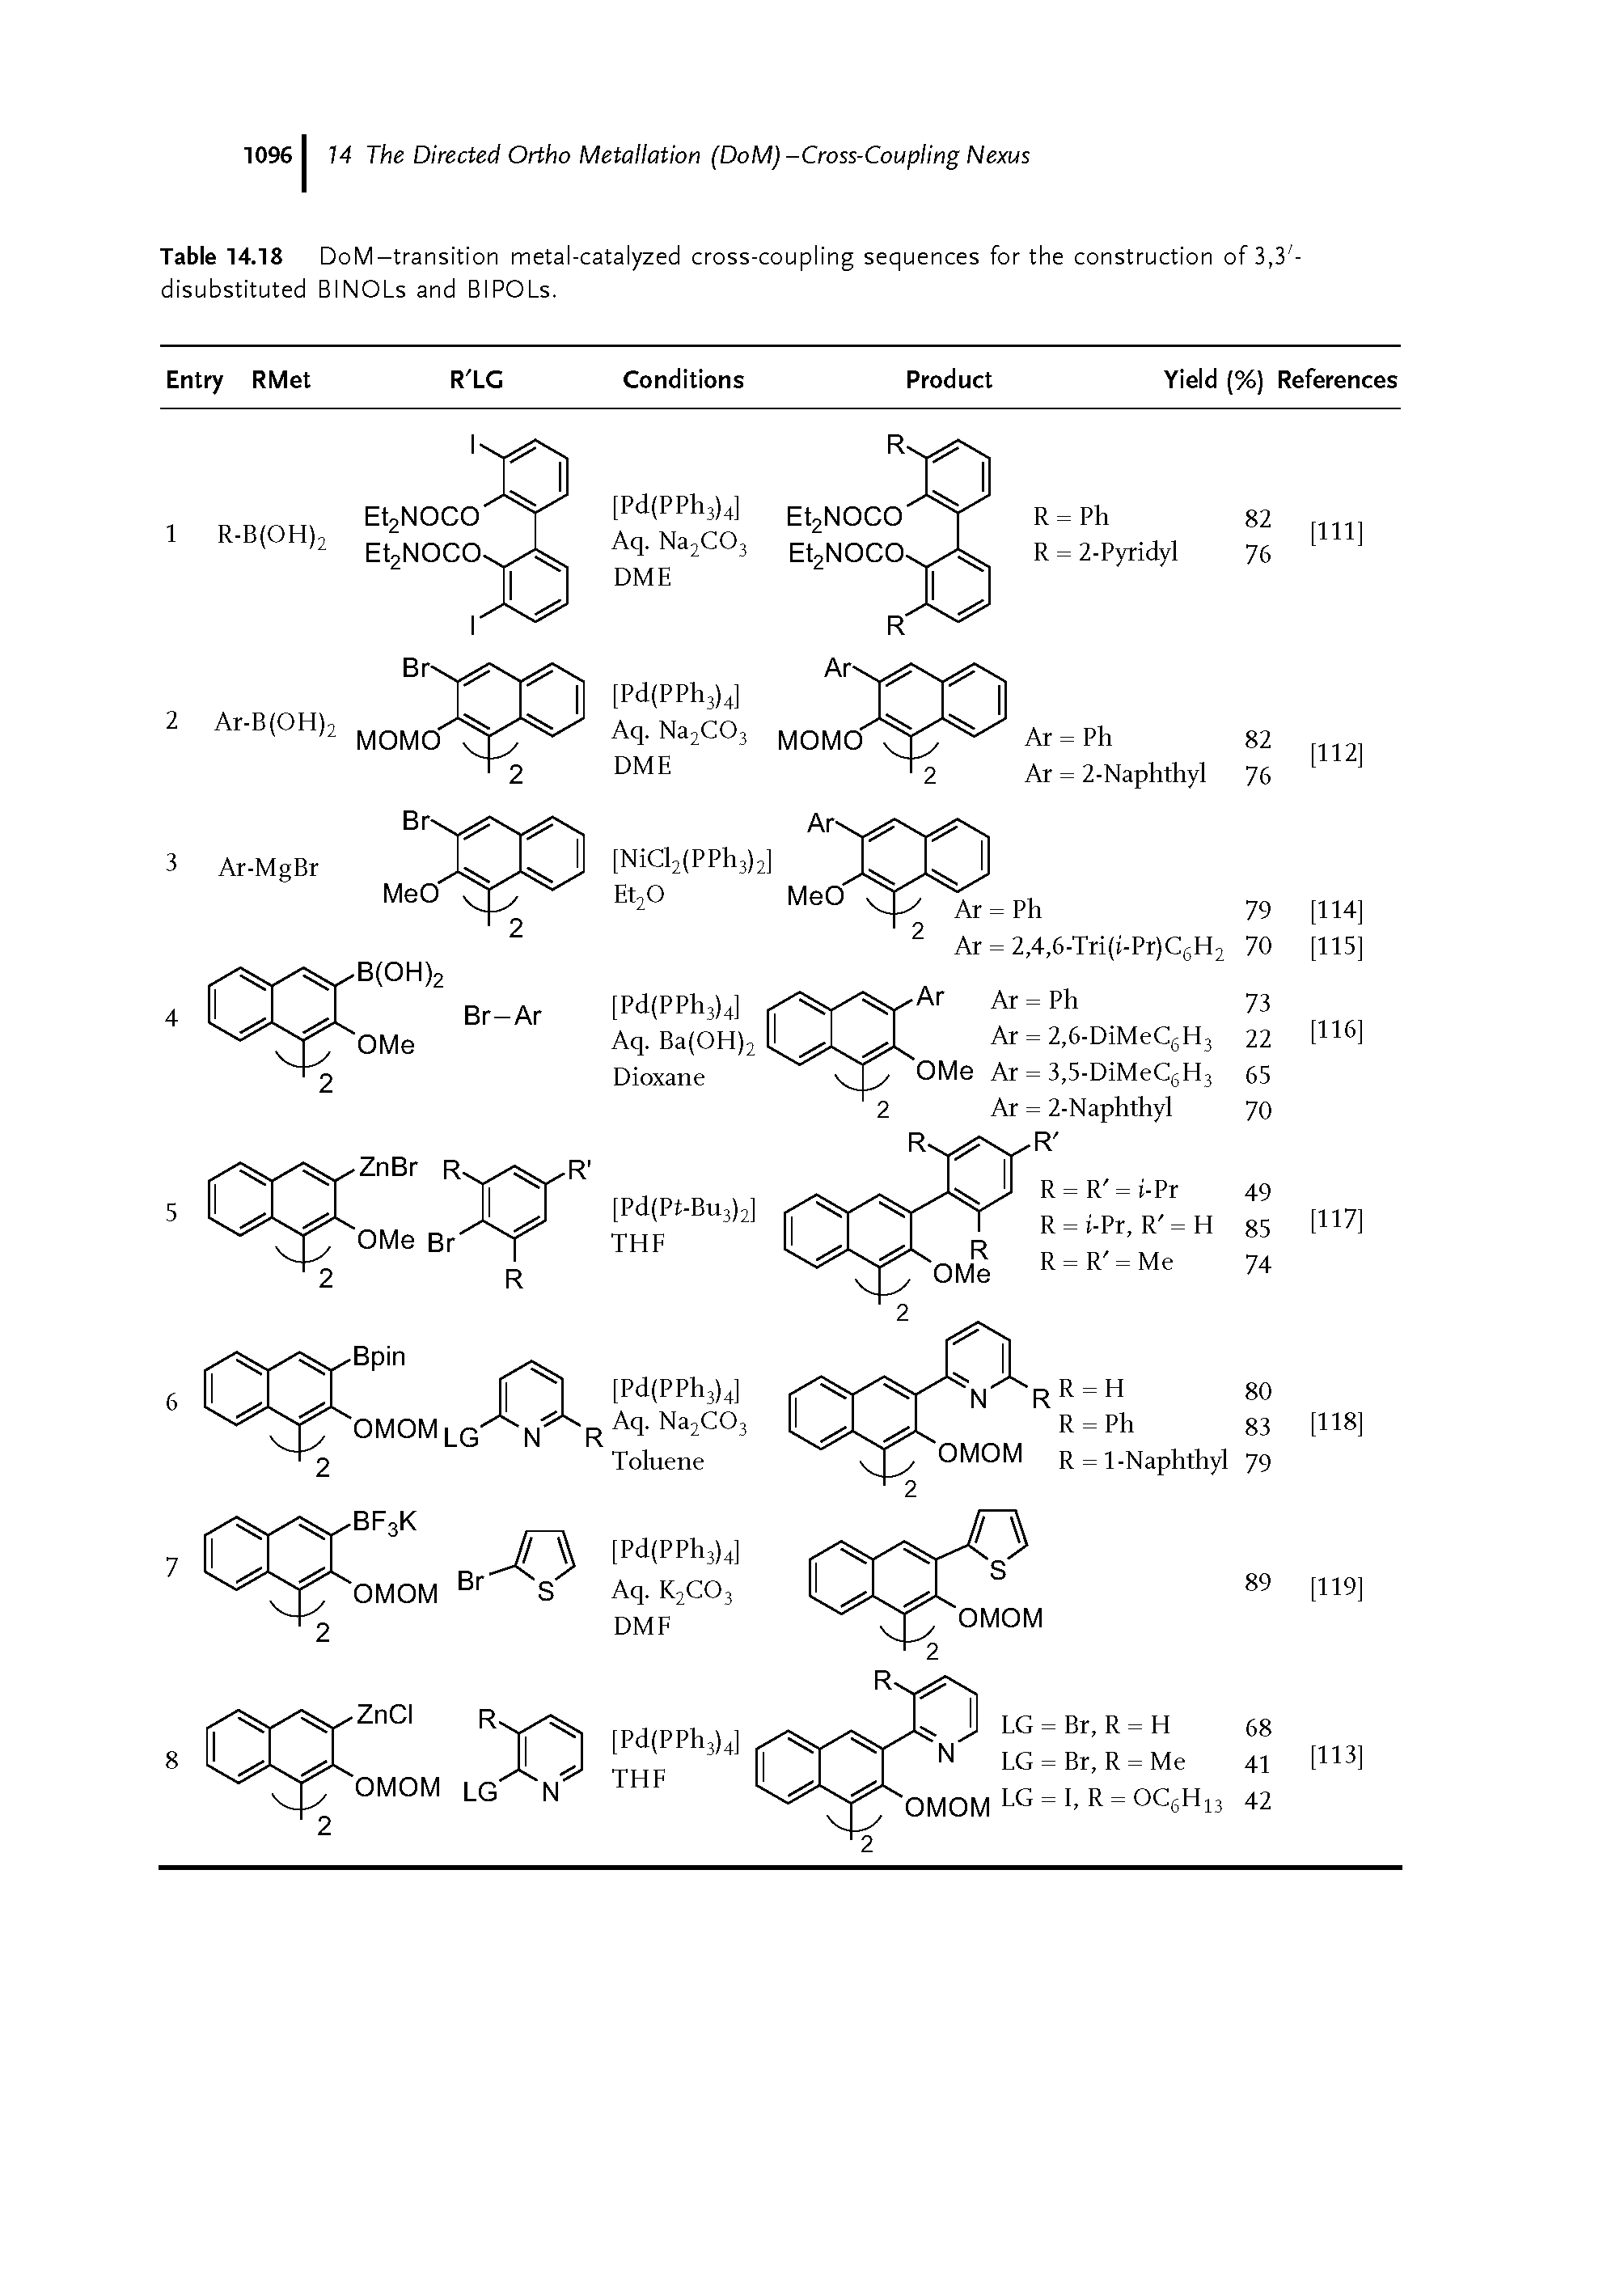 Table 14.18 DoM-transition metal-catalyzed cross-coupling sequences for the construction of 3,3 -disubstituted BINOLs and BIPOLs.